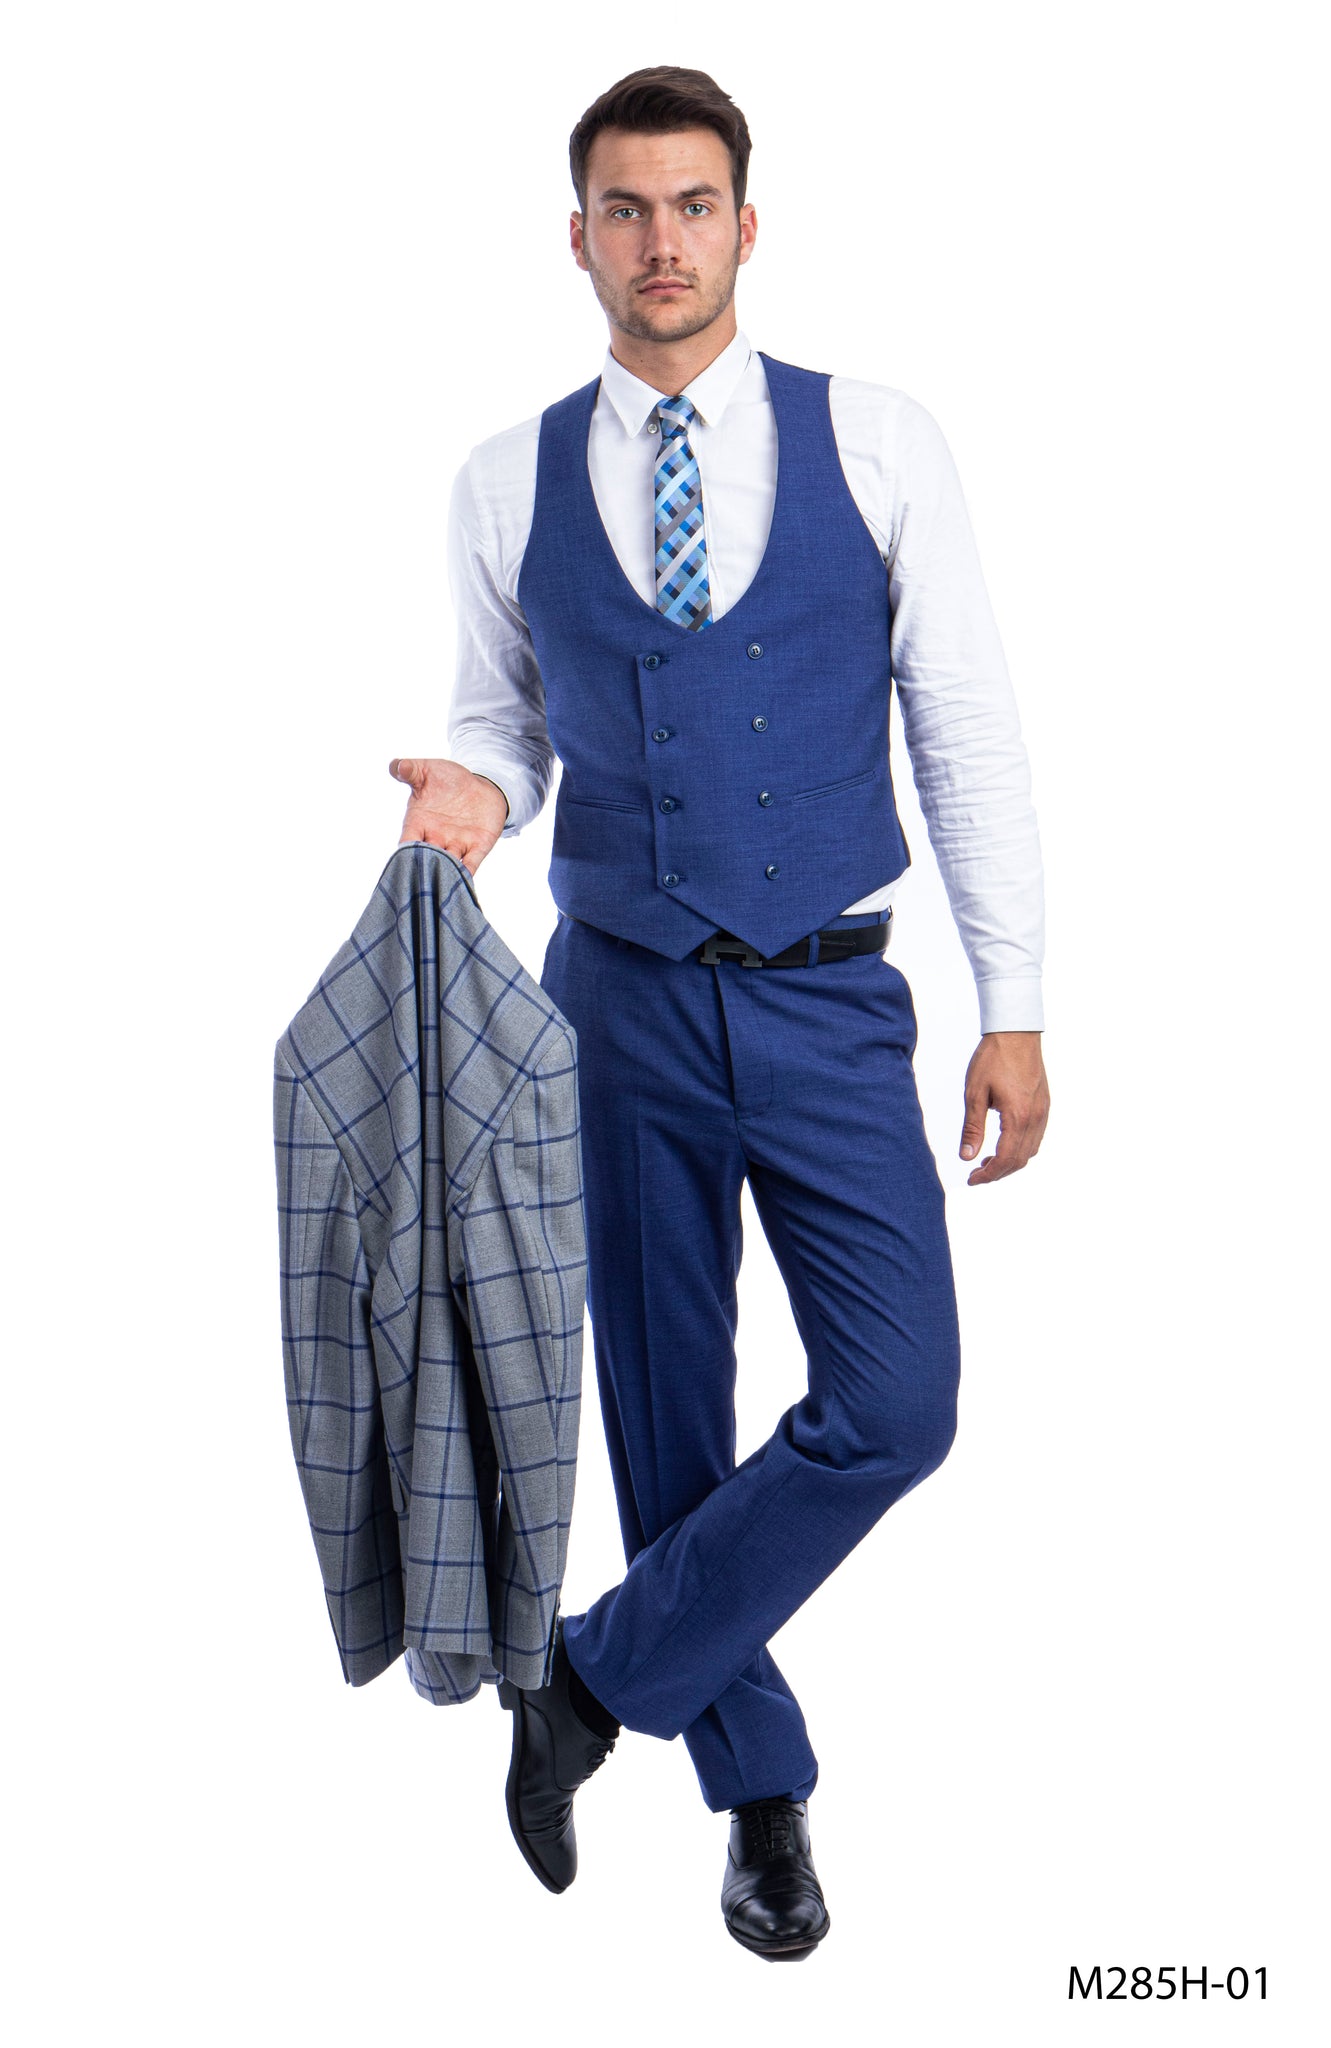 Gray/Blue Suit For Men Formal Suits For All Ocassions